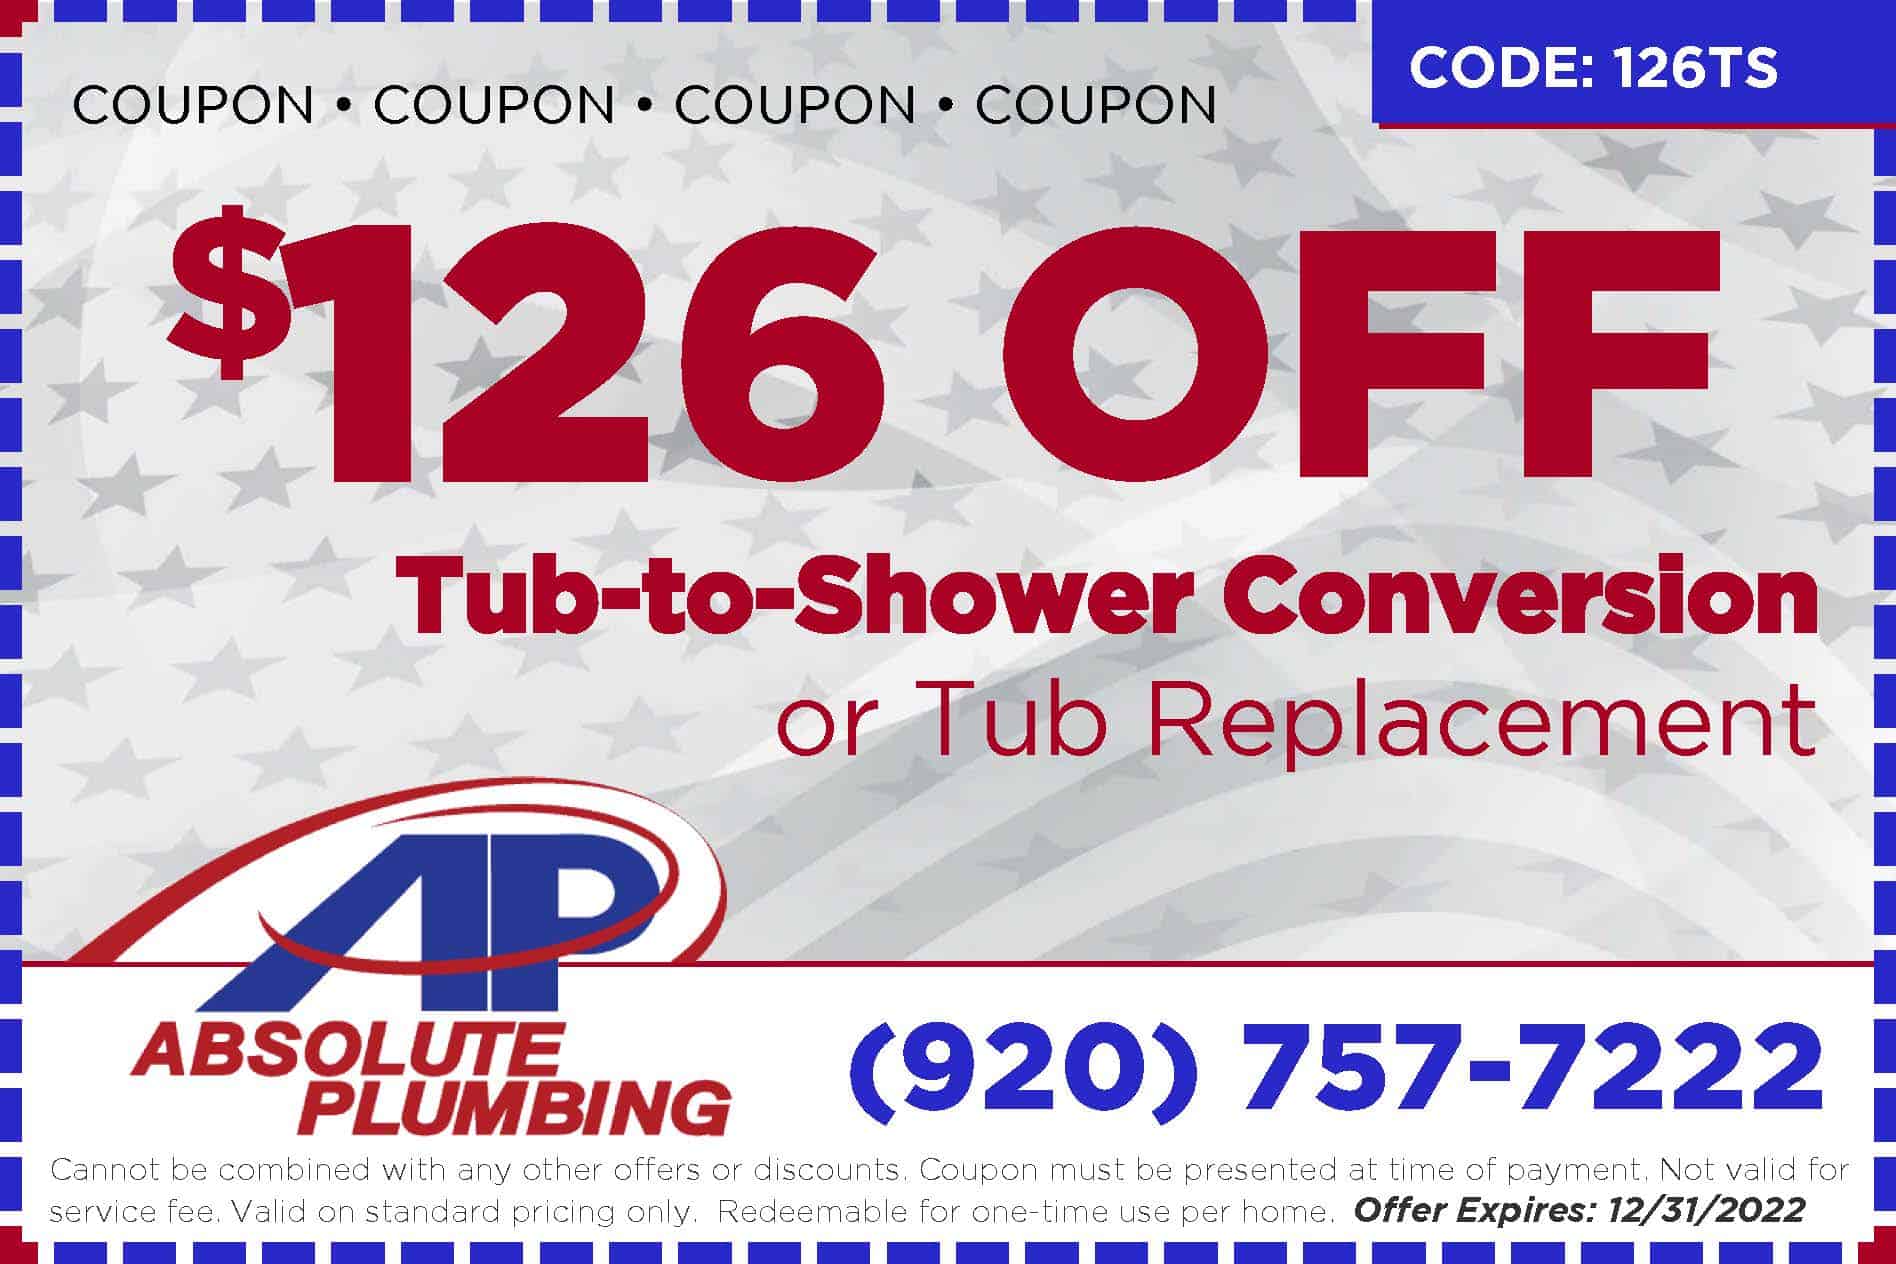 Absolute-2022 Tub-to-Shower Conversion or Tub Replacement